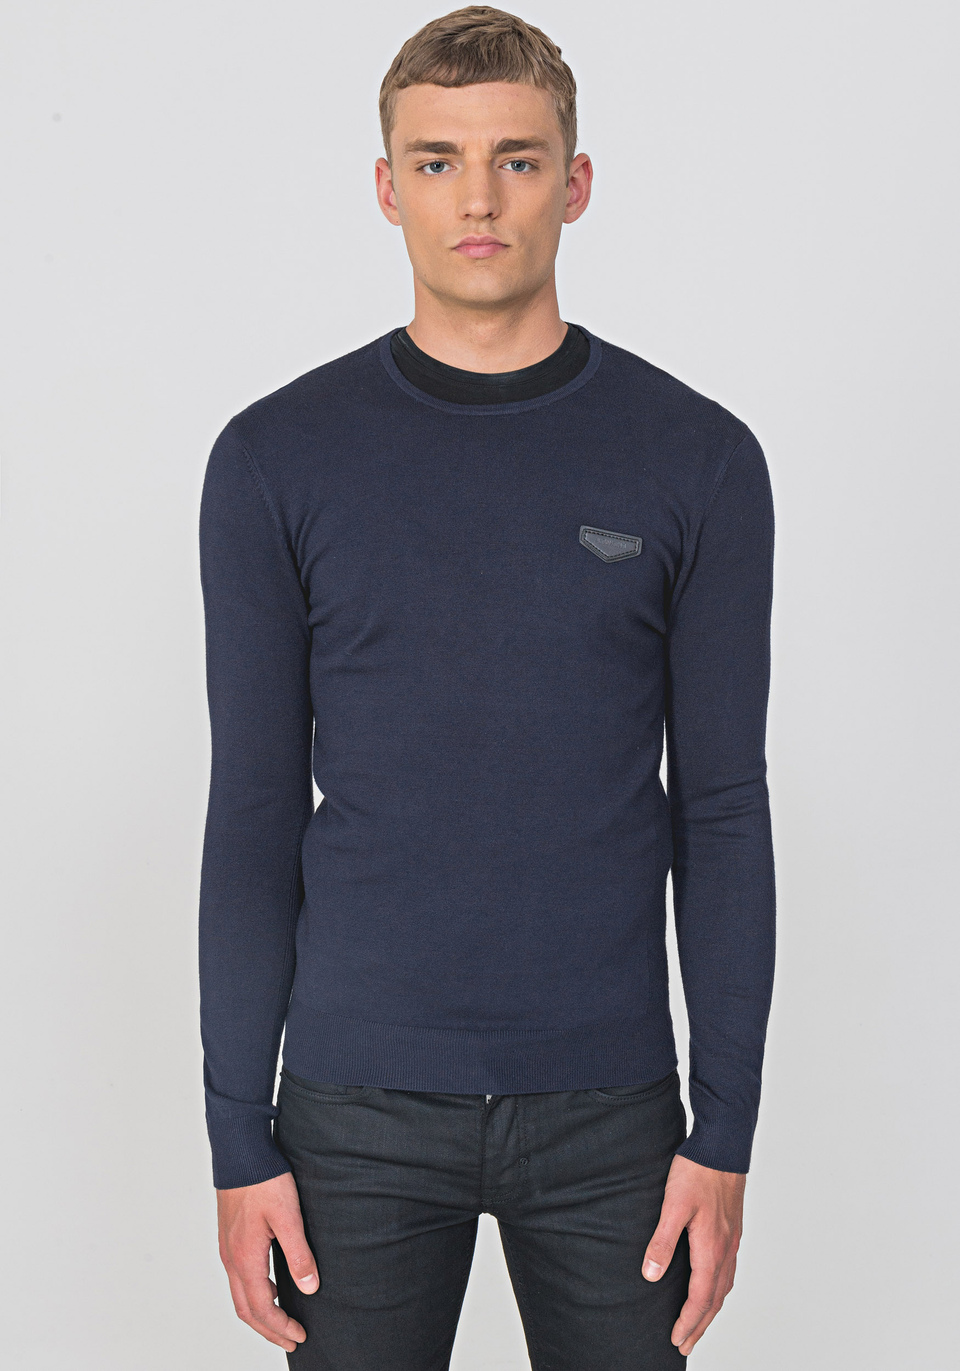 PLAIN-KNIT VISCOSE-BLEND SWEATER IN A RELAXED FIT - Antony Morato Online Shop